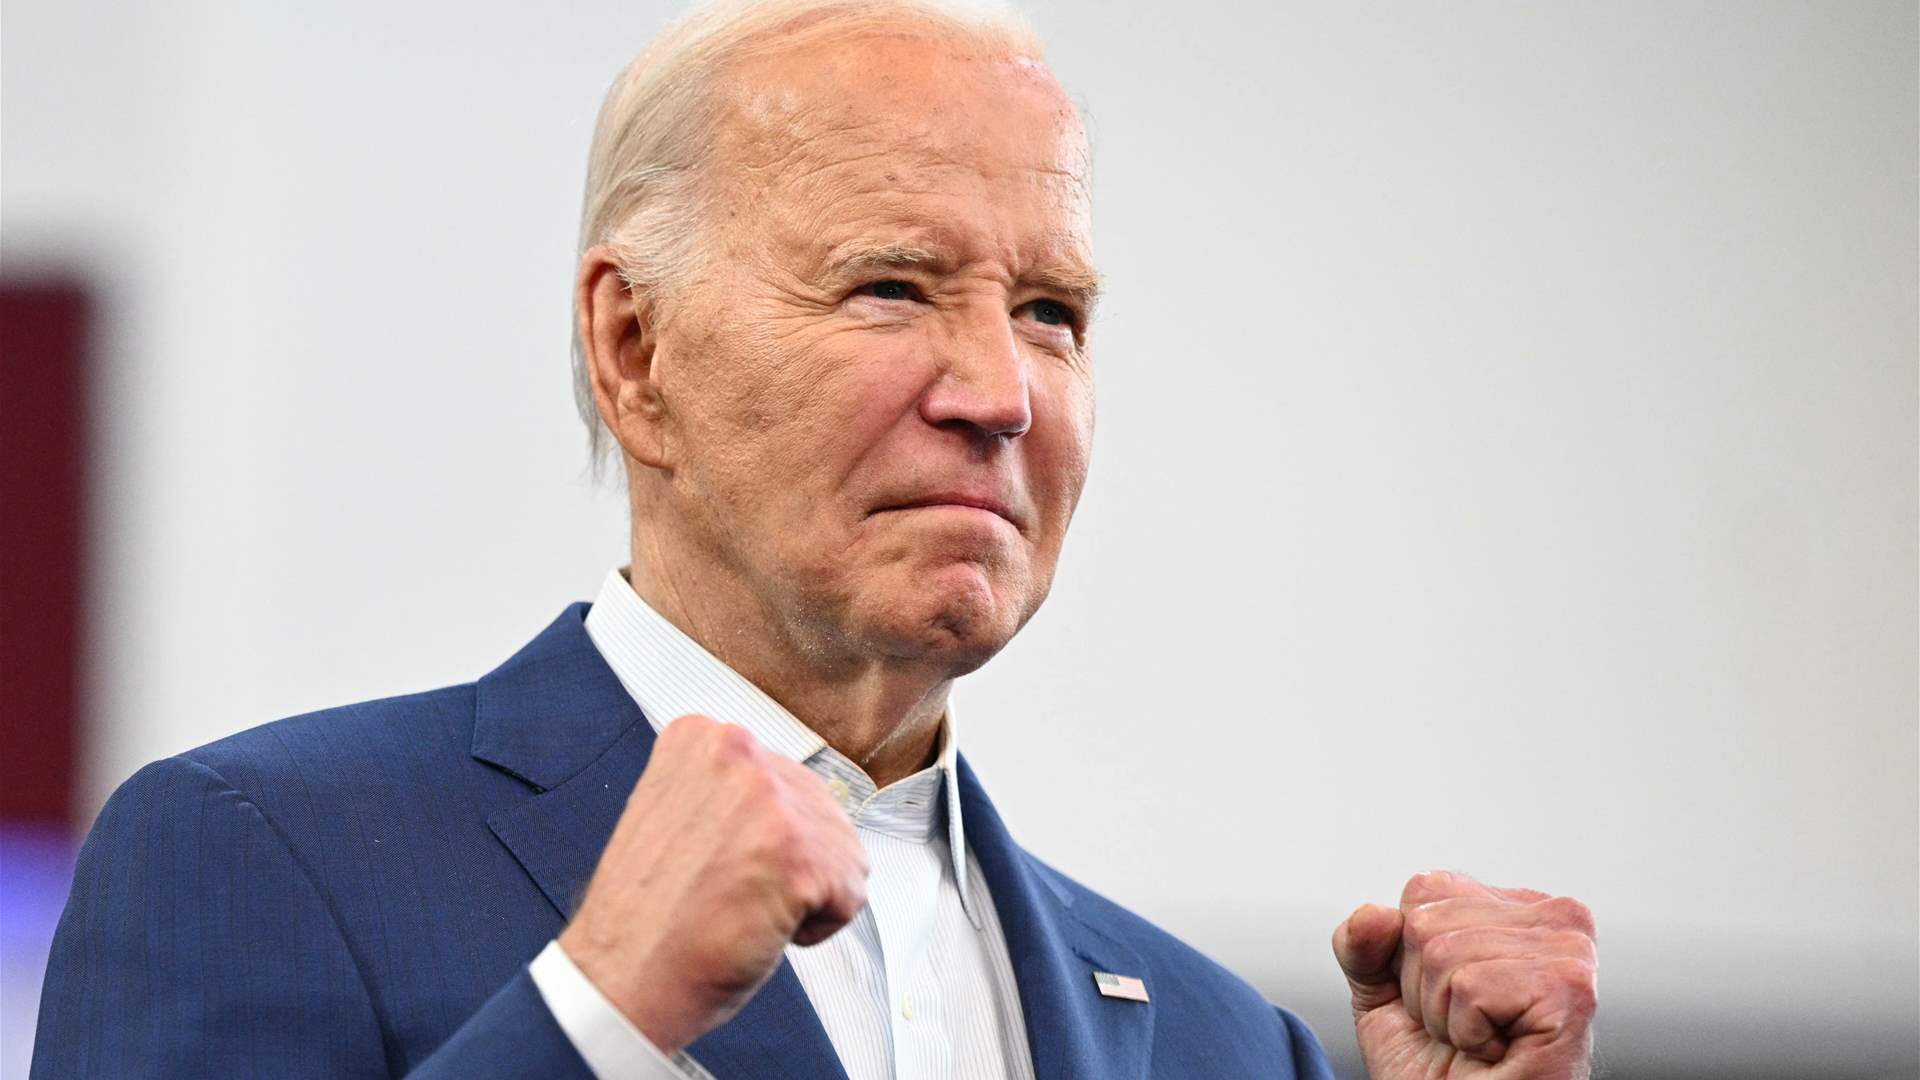 Biden says &#39;I&#39;m not going anywhere,&#39; as campaign struggles